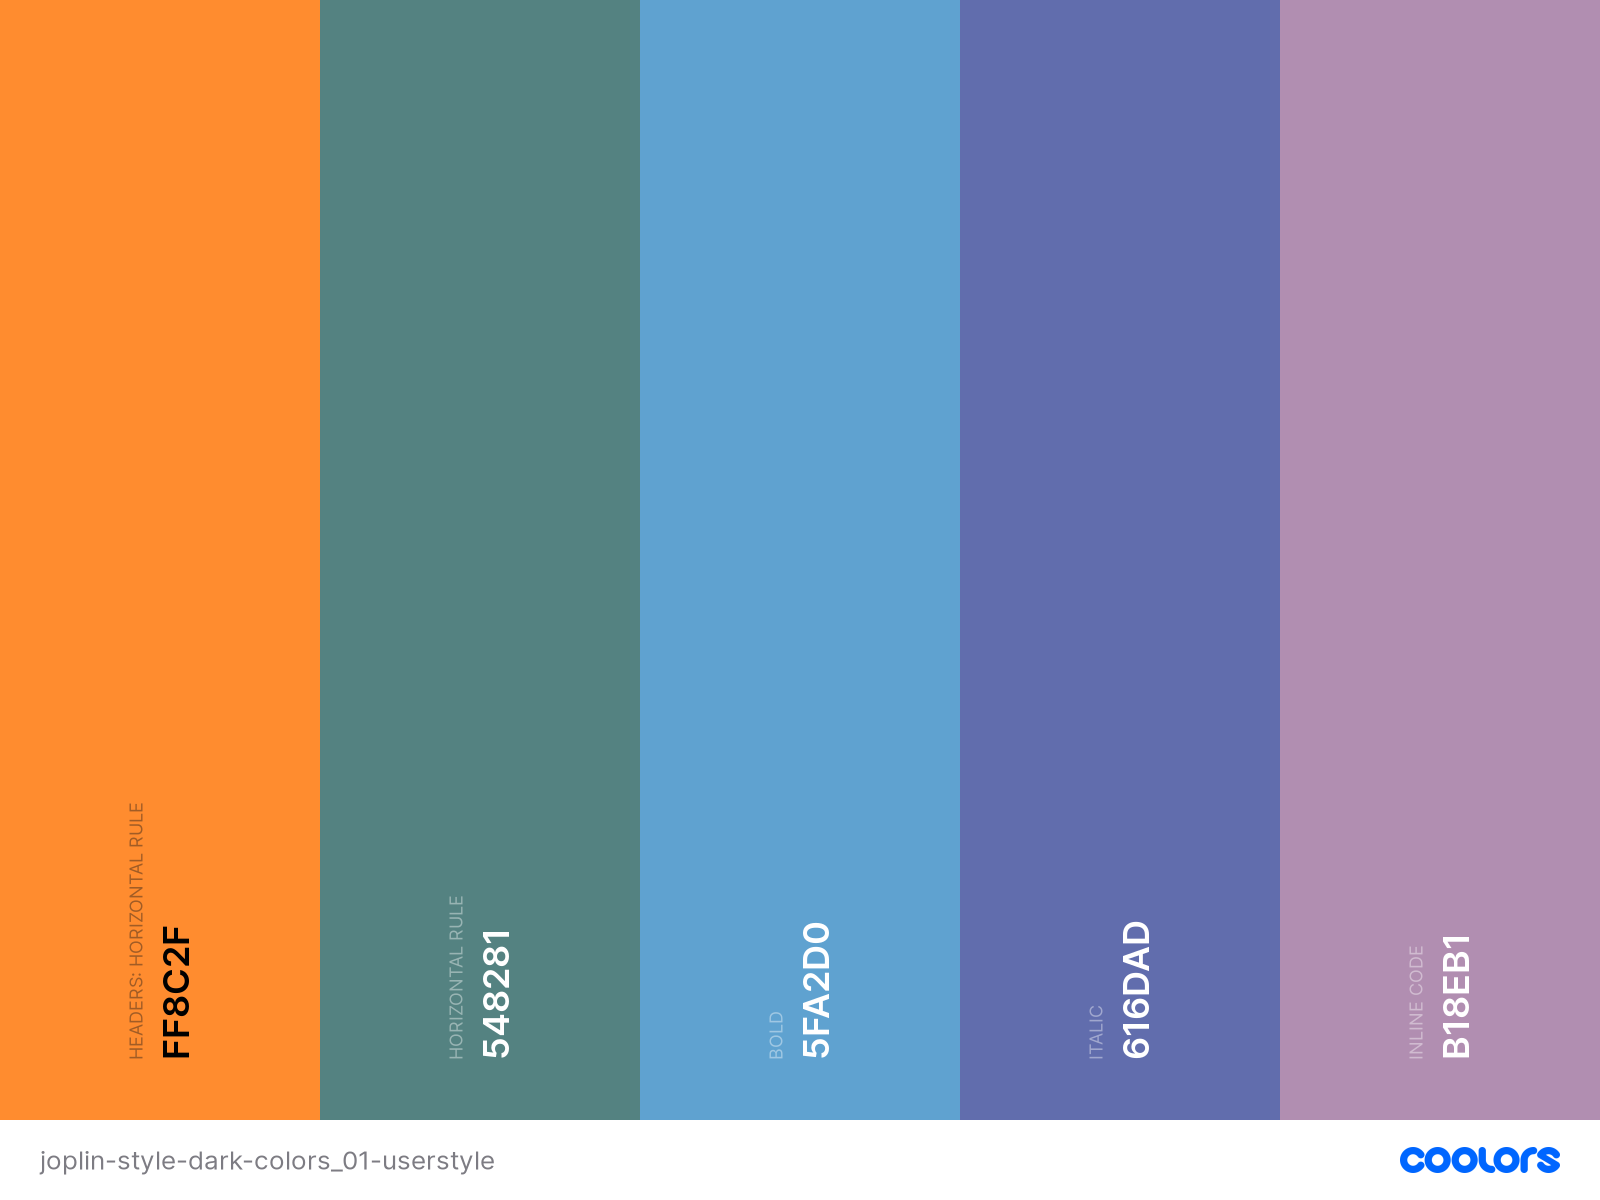 userstyle-color-pallette